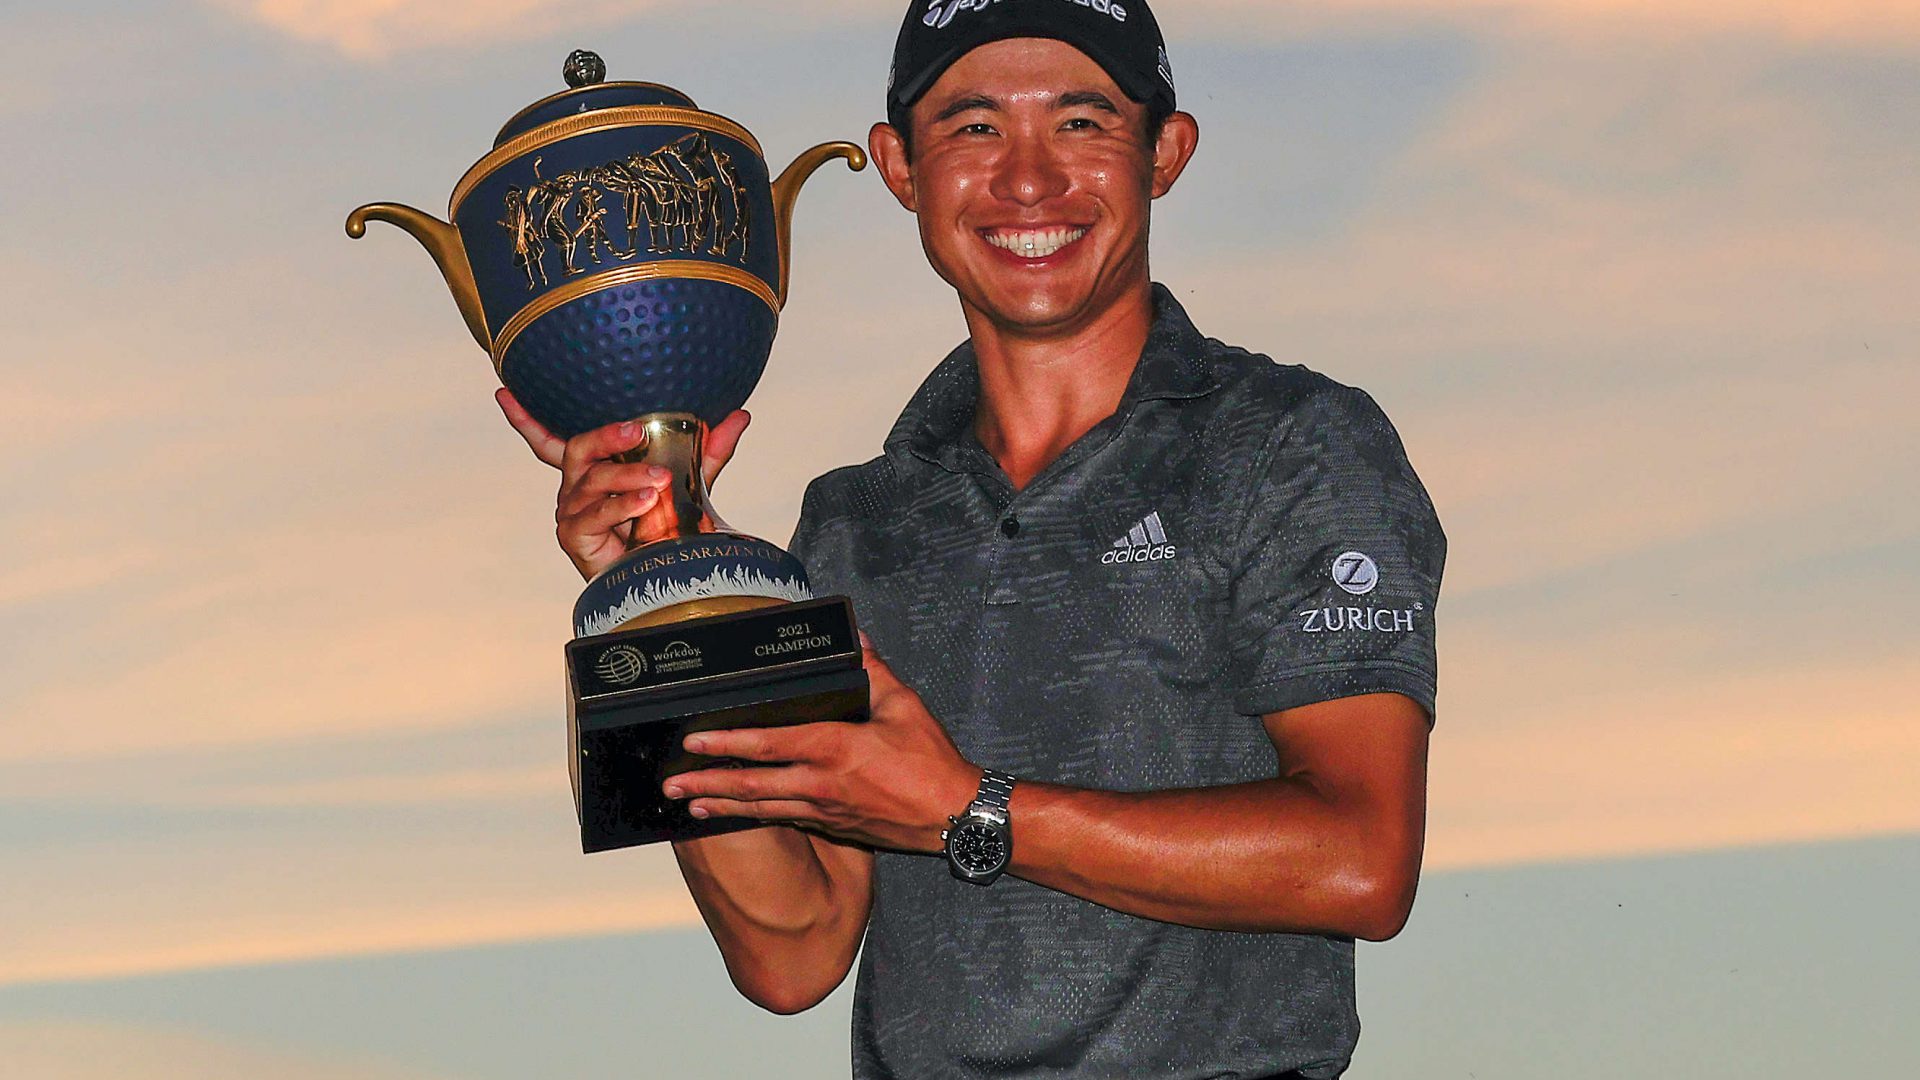 BRADENTON, FLORIDA - FEBRUARY 28: Collin Morikawa of the United States celebrates with the Gene Sarazen Cup during the trophy ceremony after winning the final round of World Golf Championships-Workday Championship at The Concession on February 28, 2021 in Bradenton, Florida. (Photo by Sam Greenwood/Getty Images)